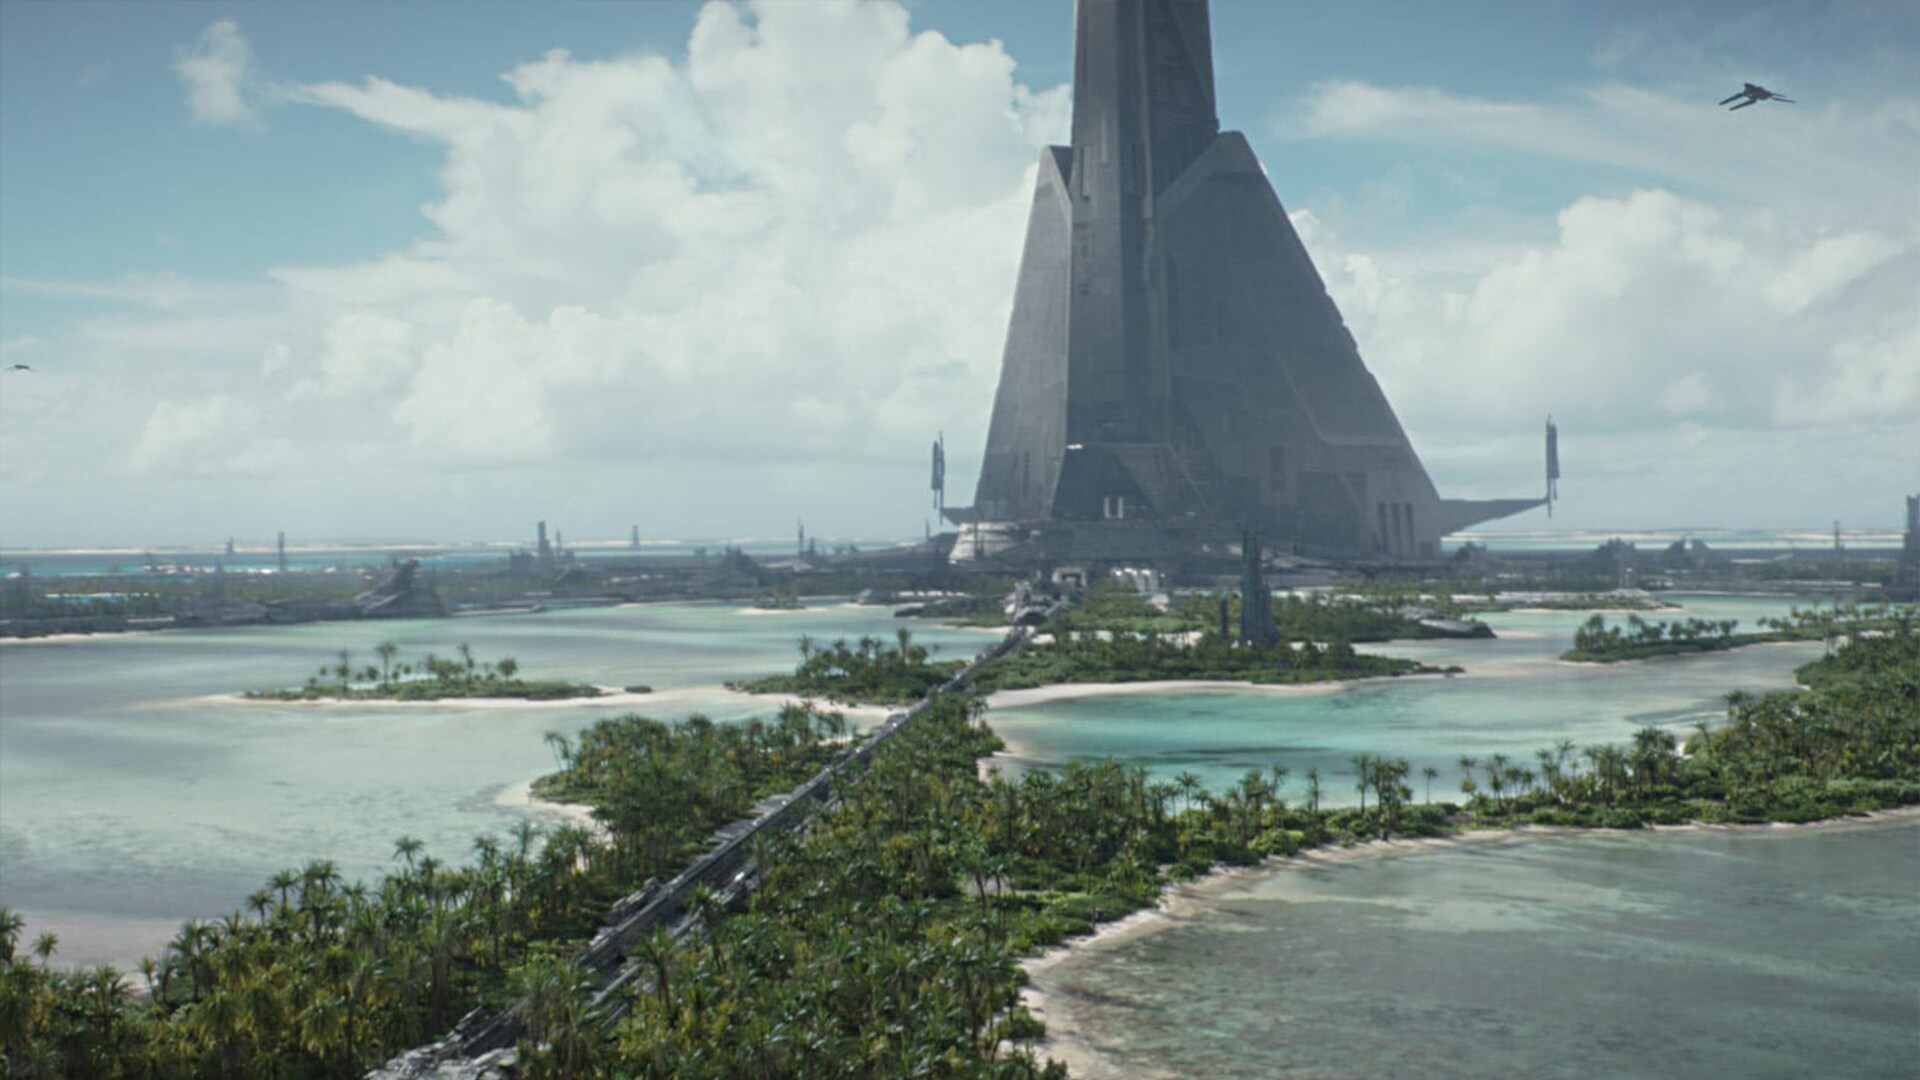 The Abrion sector and Scarif are mentioned in Supervisor Lonni Jung’s ISB update as a site of inc...